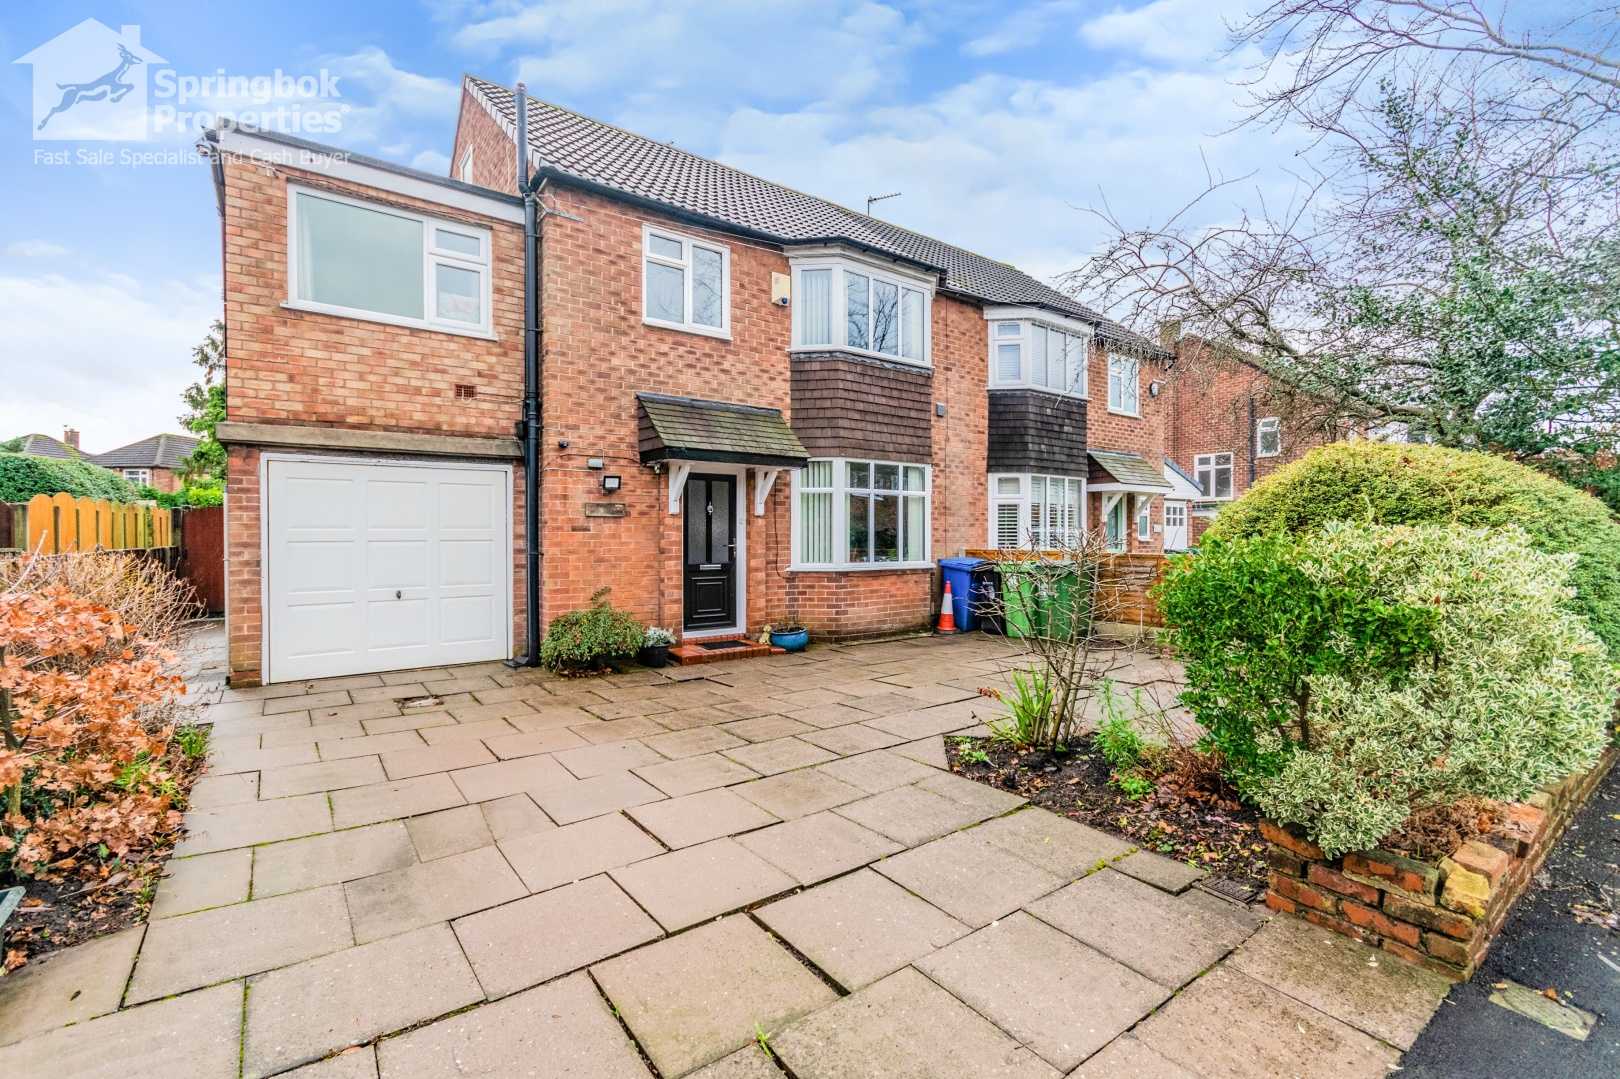 House in Wythenshawe, Manchester 11391628